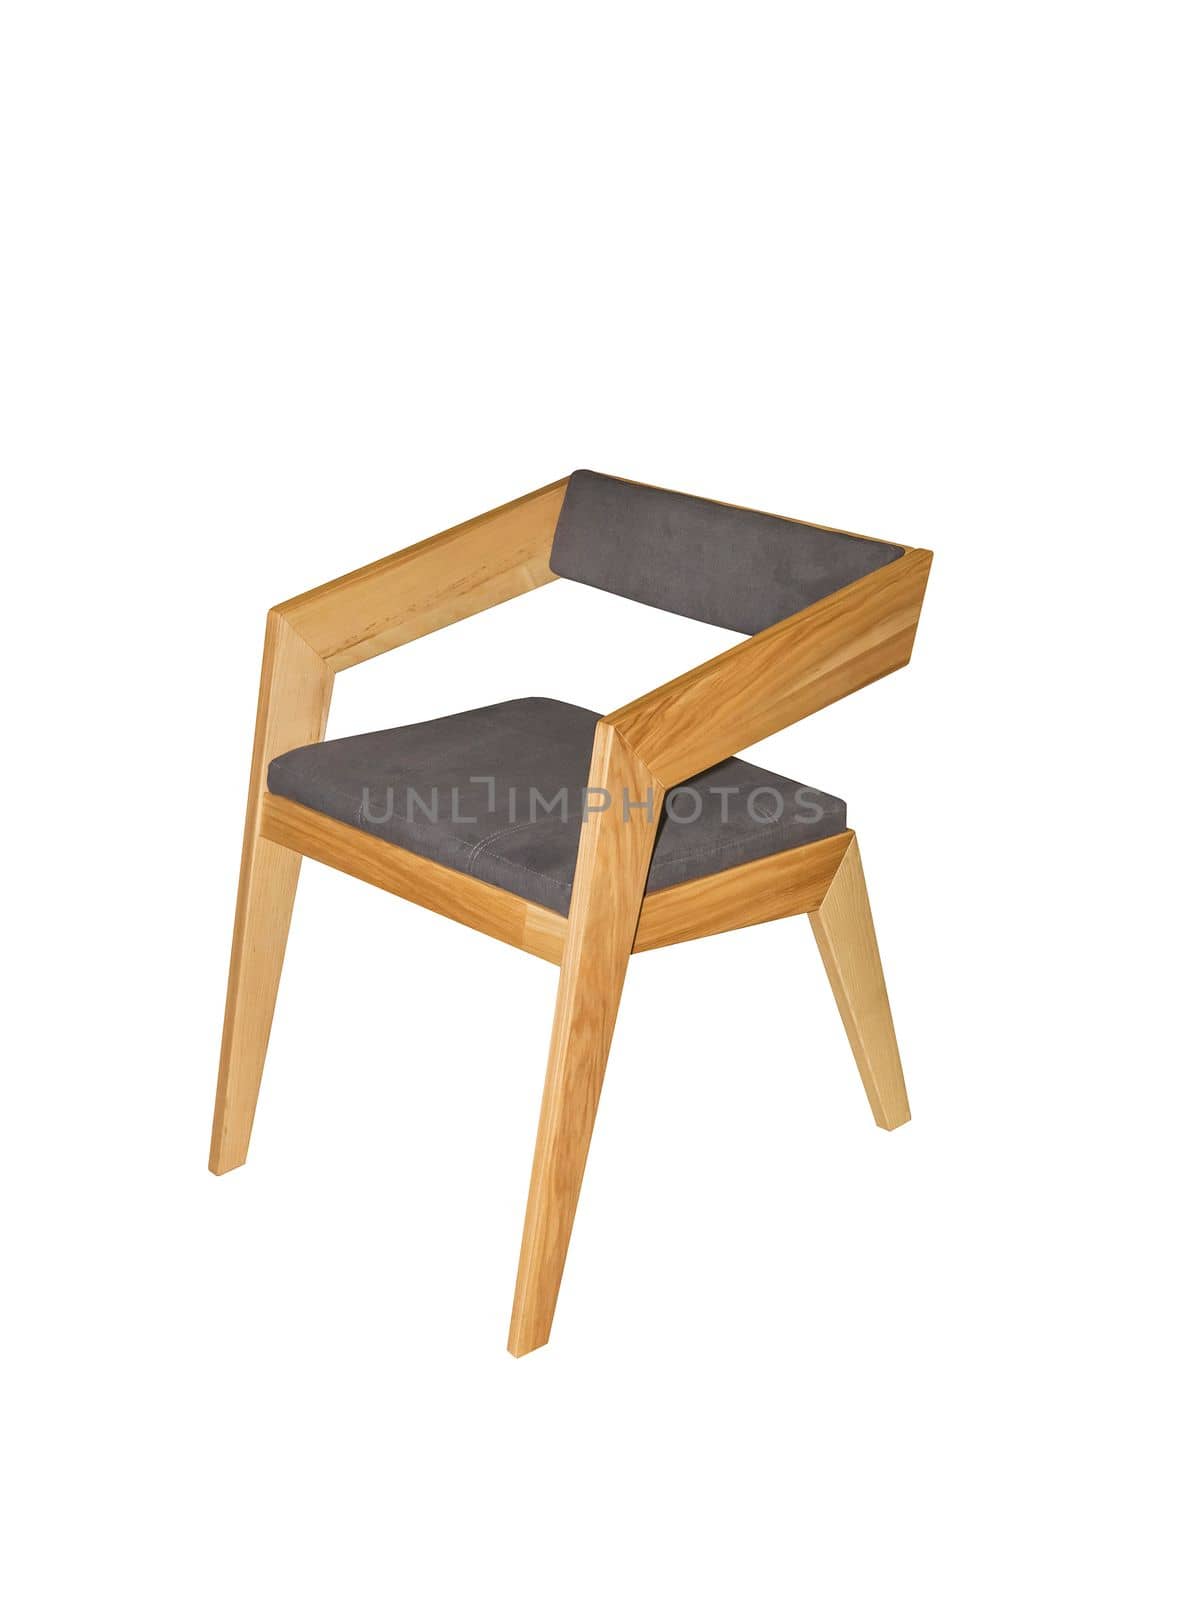 wooden chair at 45 degrees on white background. Interior element.